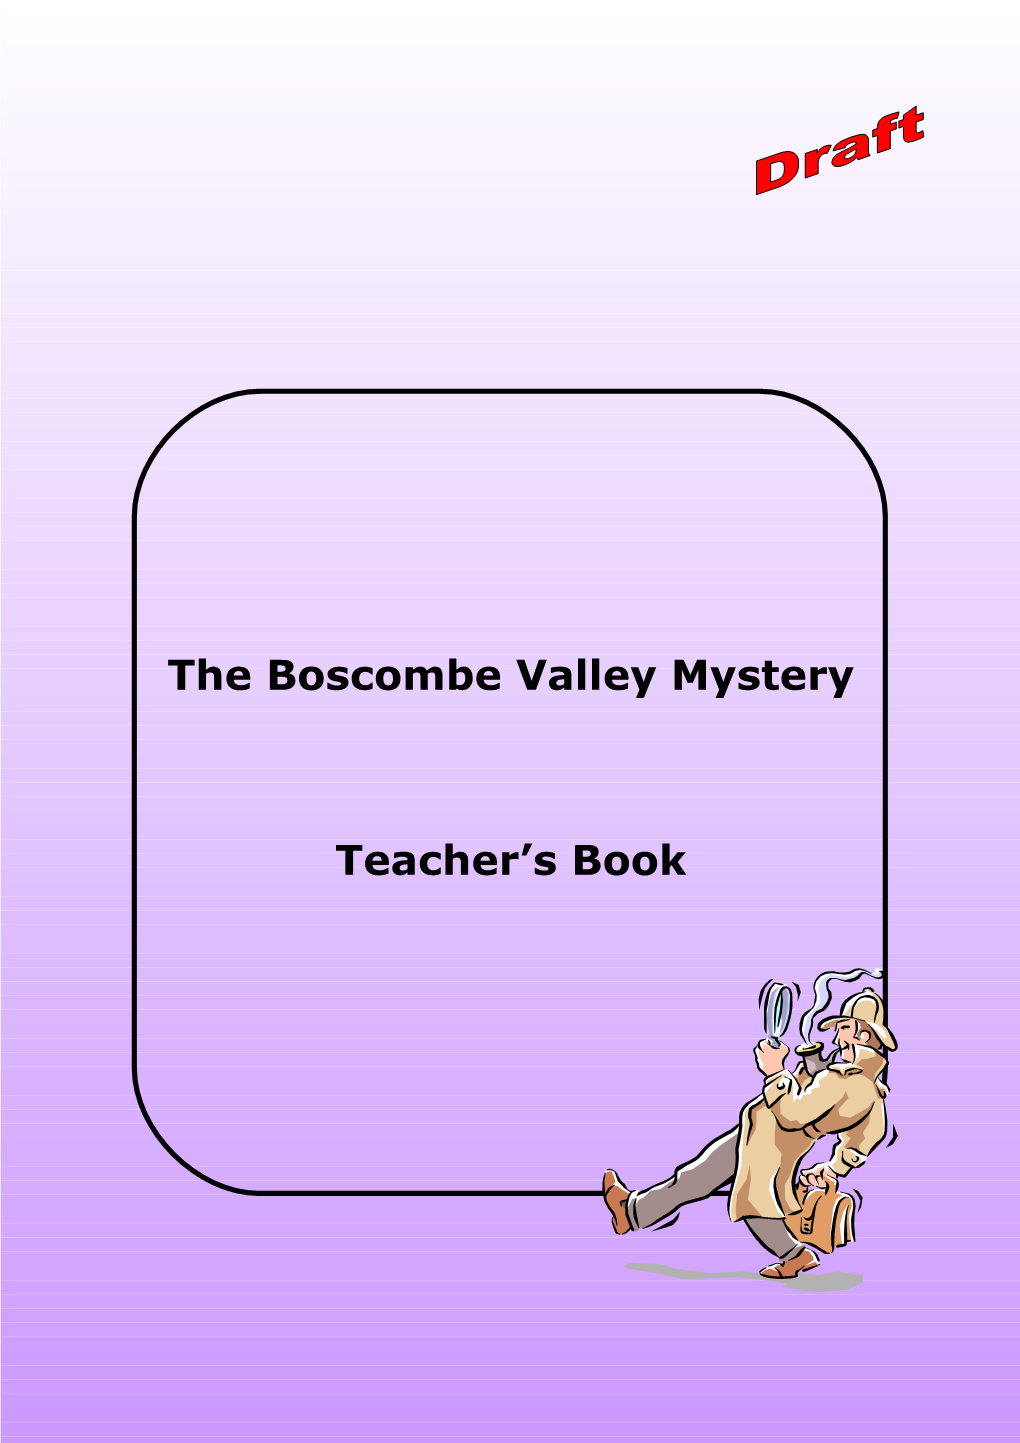 The Boscombevalley Mystery